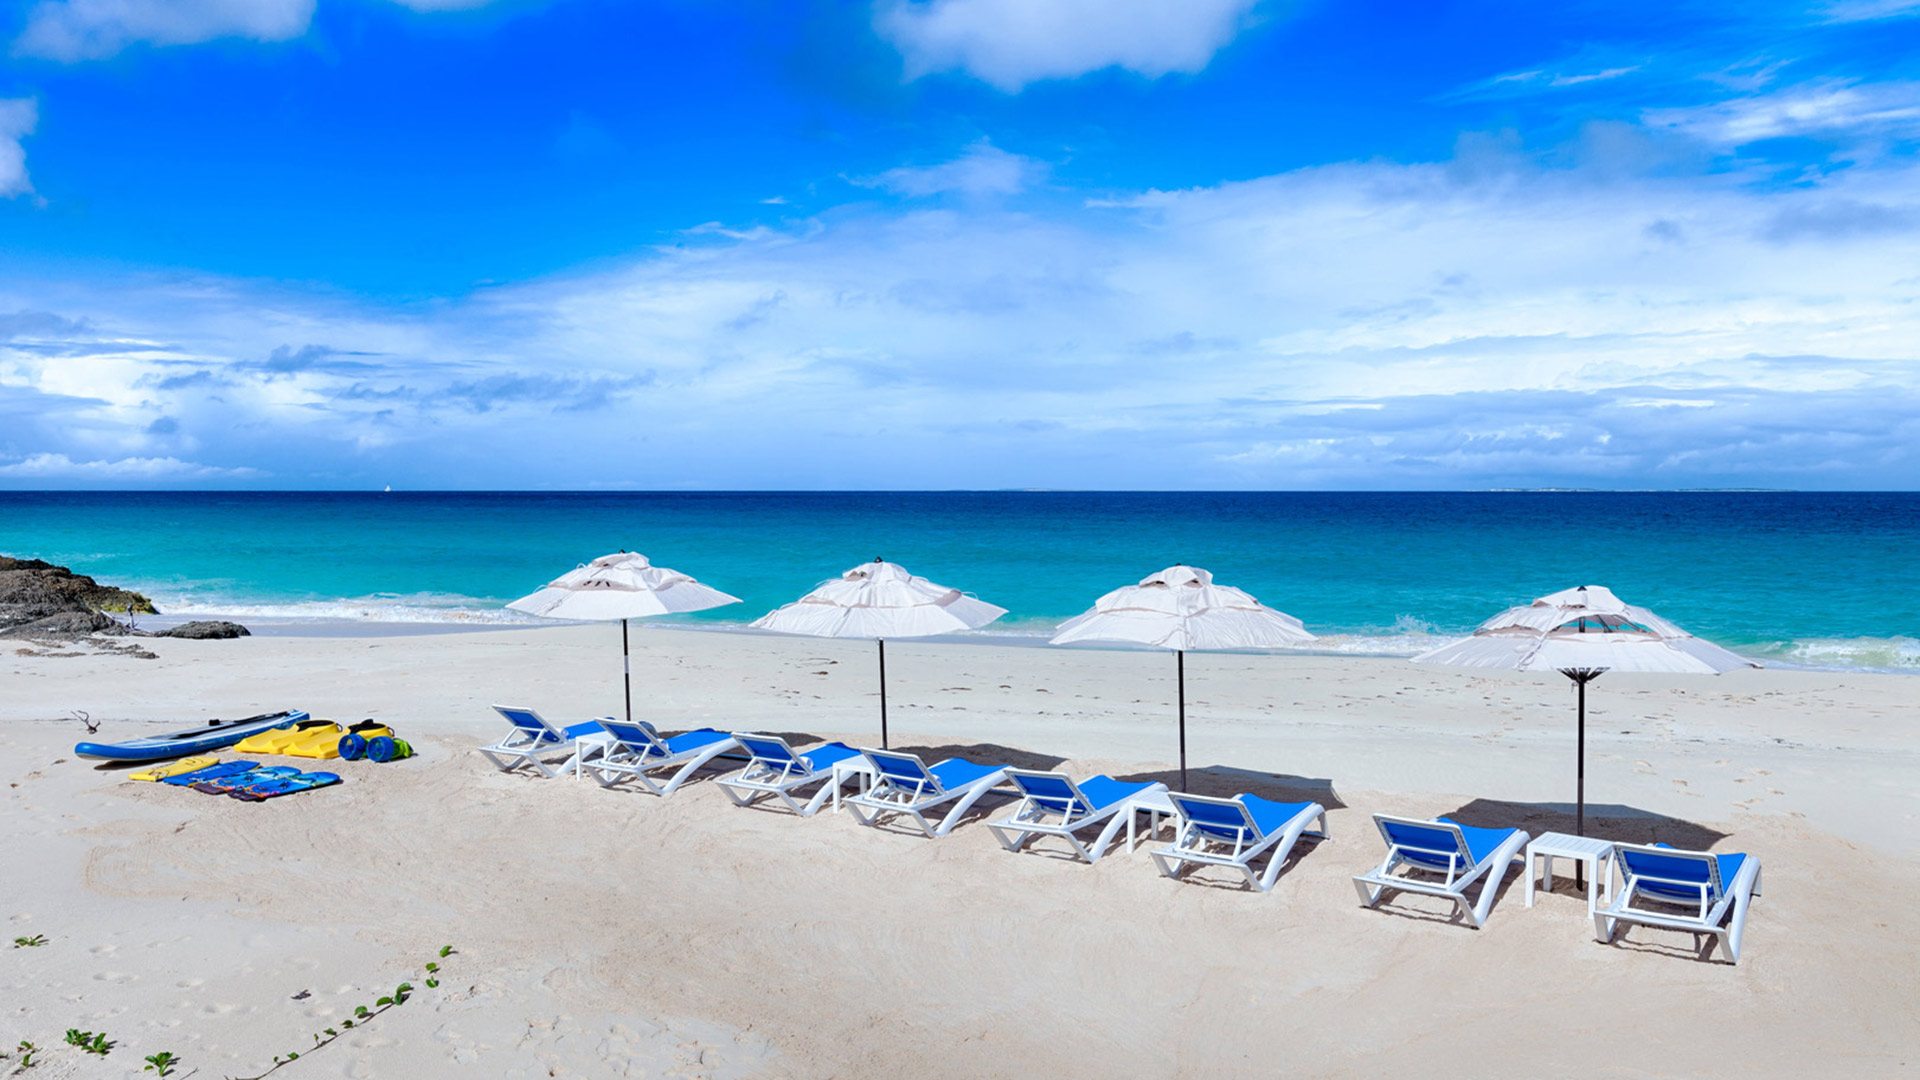 Watersports abound at the exclusive Anguilla retreat of Nevaeh Villa